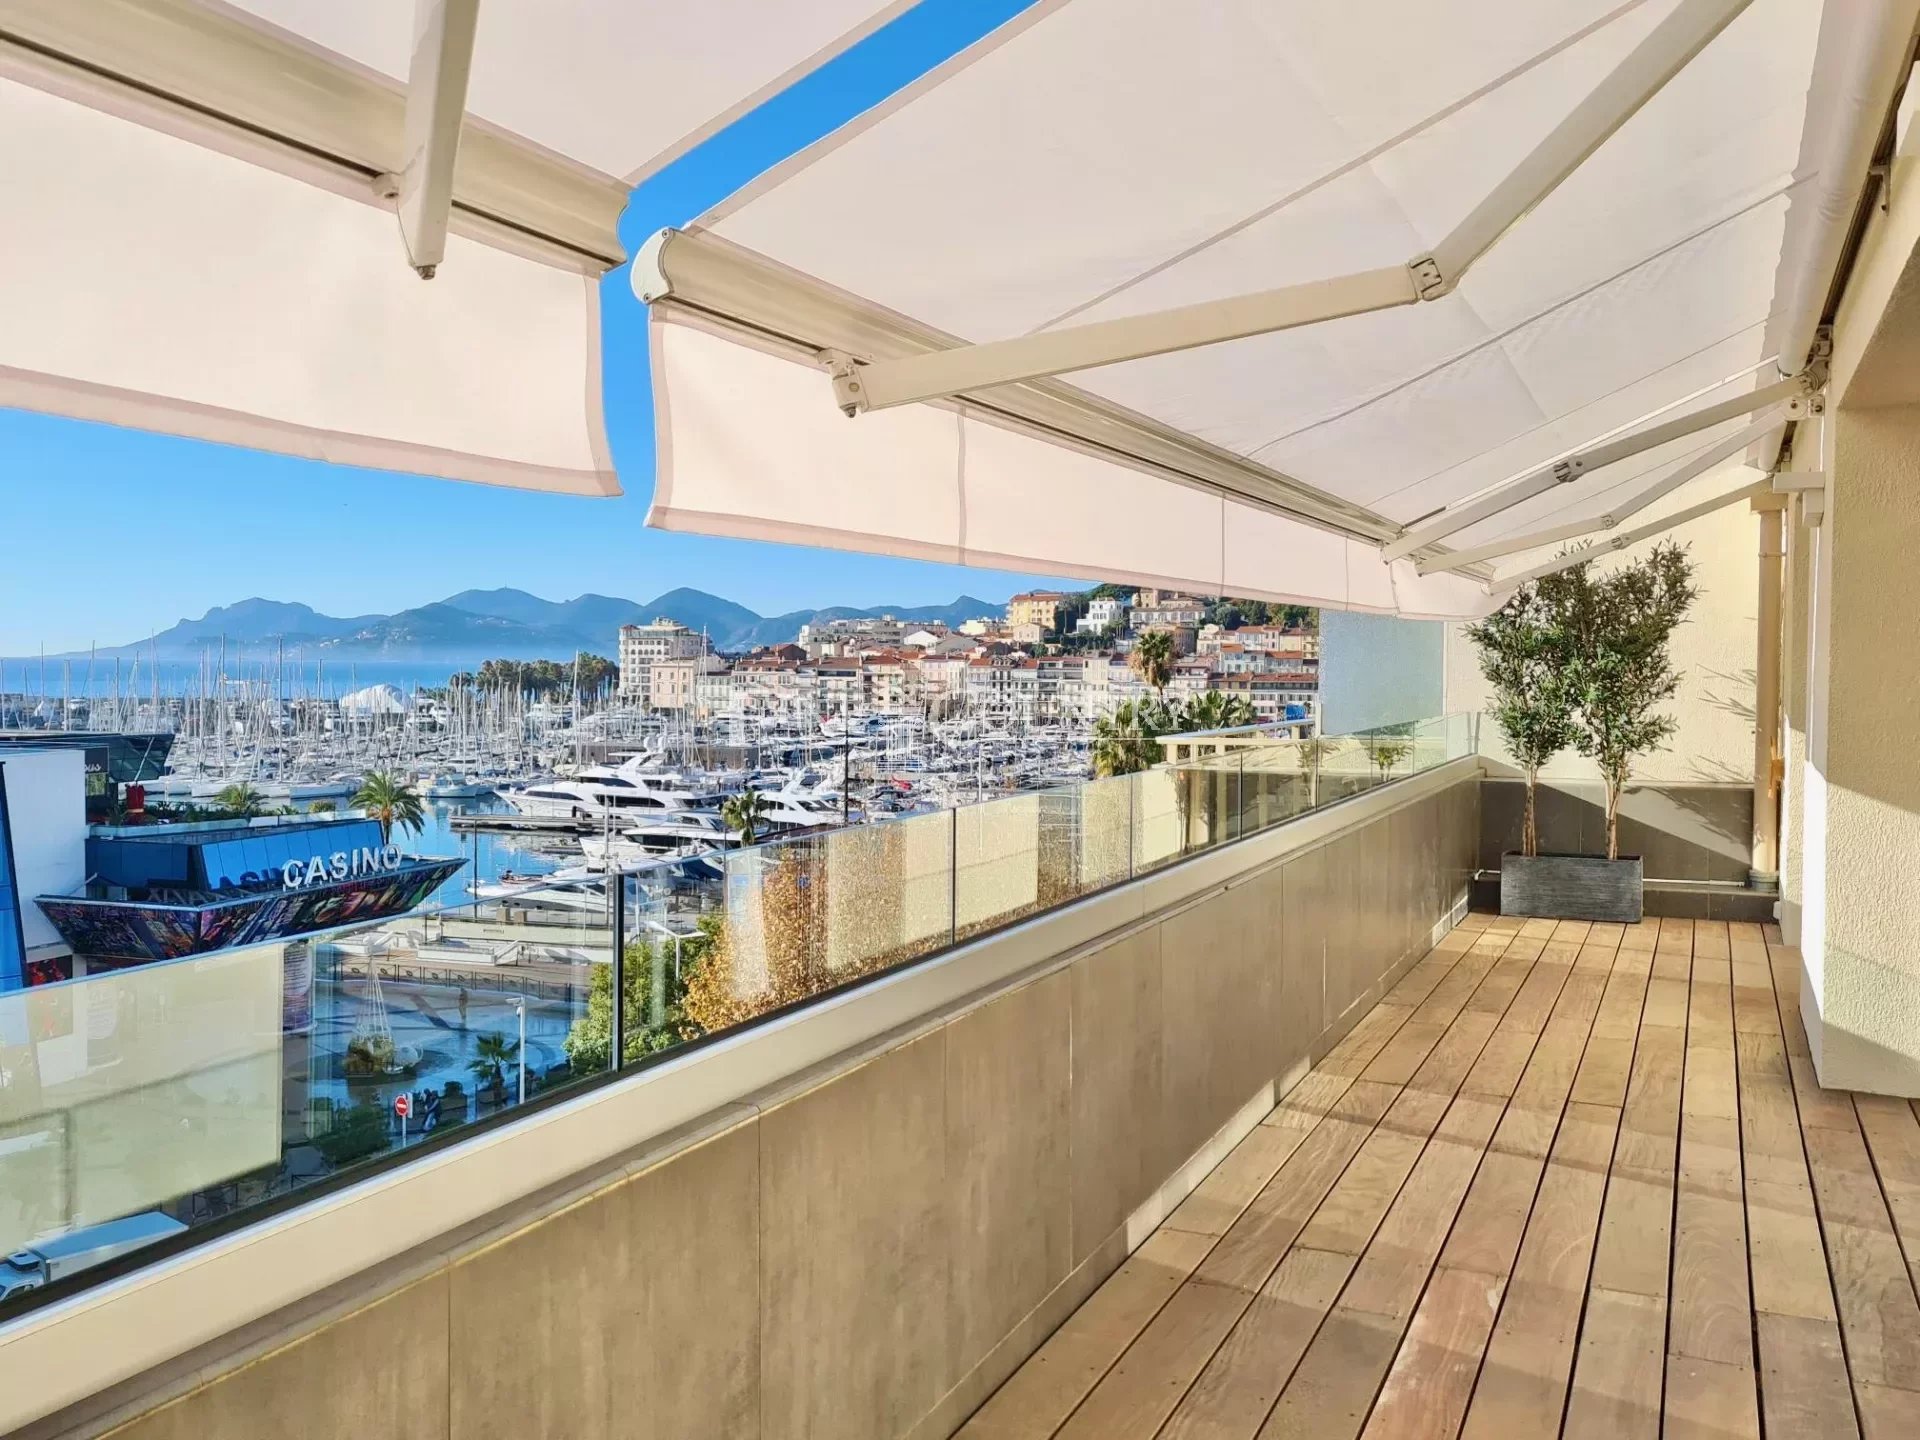 Luxury Penthouse for sale in Cannes Accommodation in Cannes